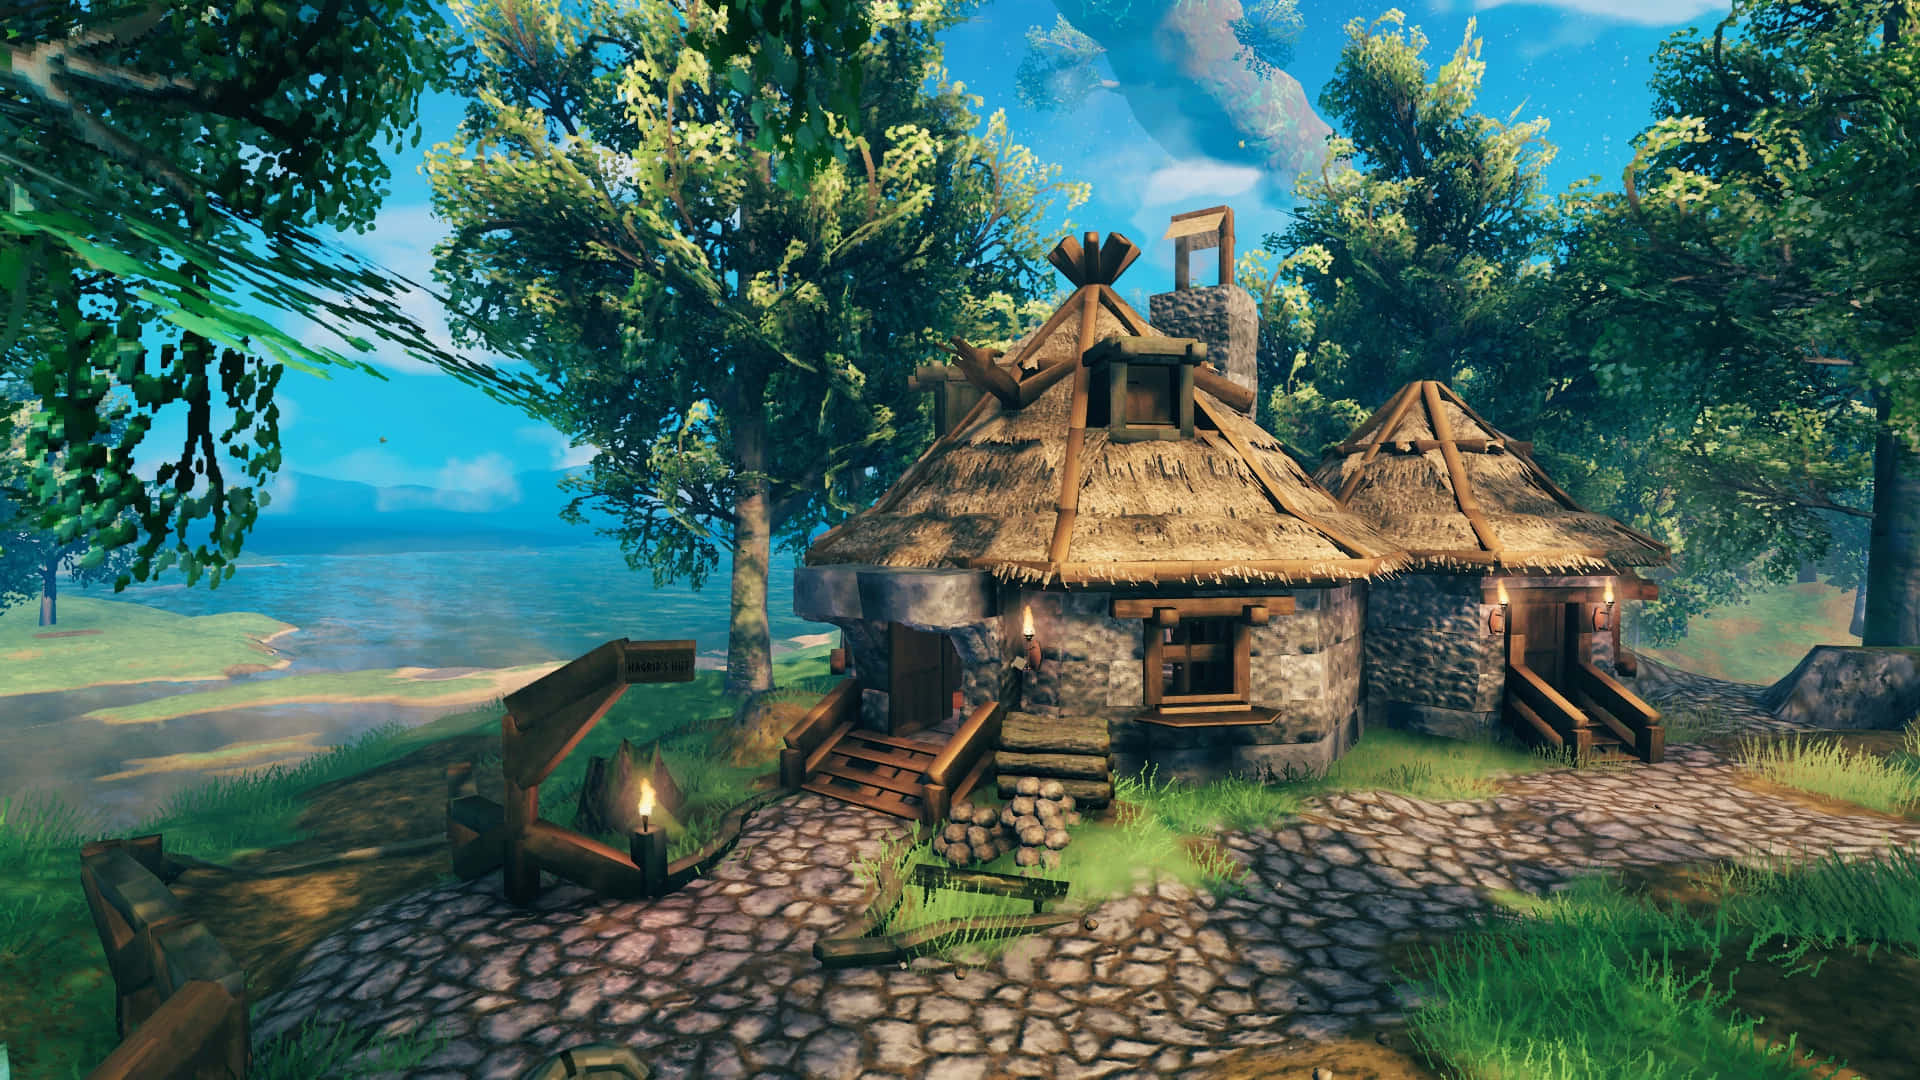 Enchanting View of Hagrid's Hut in the Magical World of Hogwarts Wallpaper